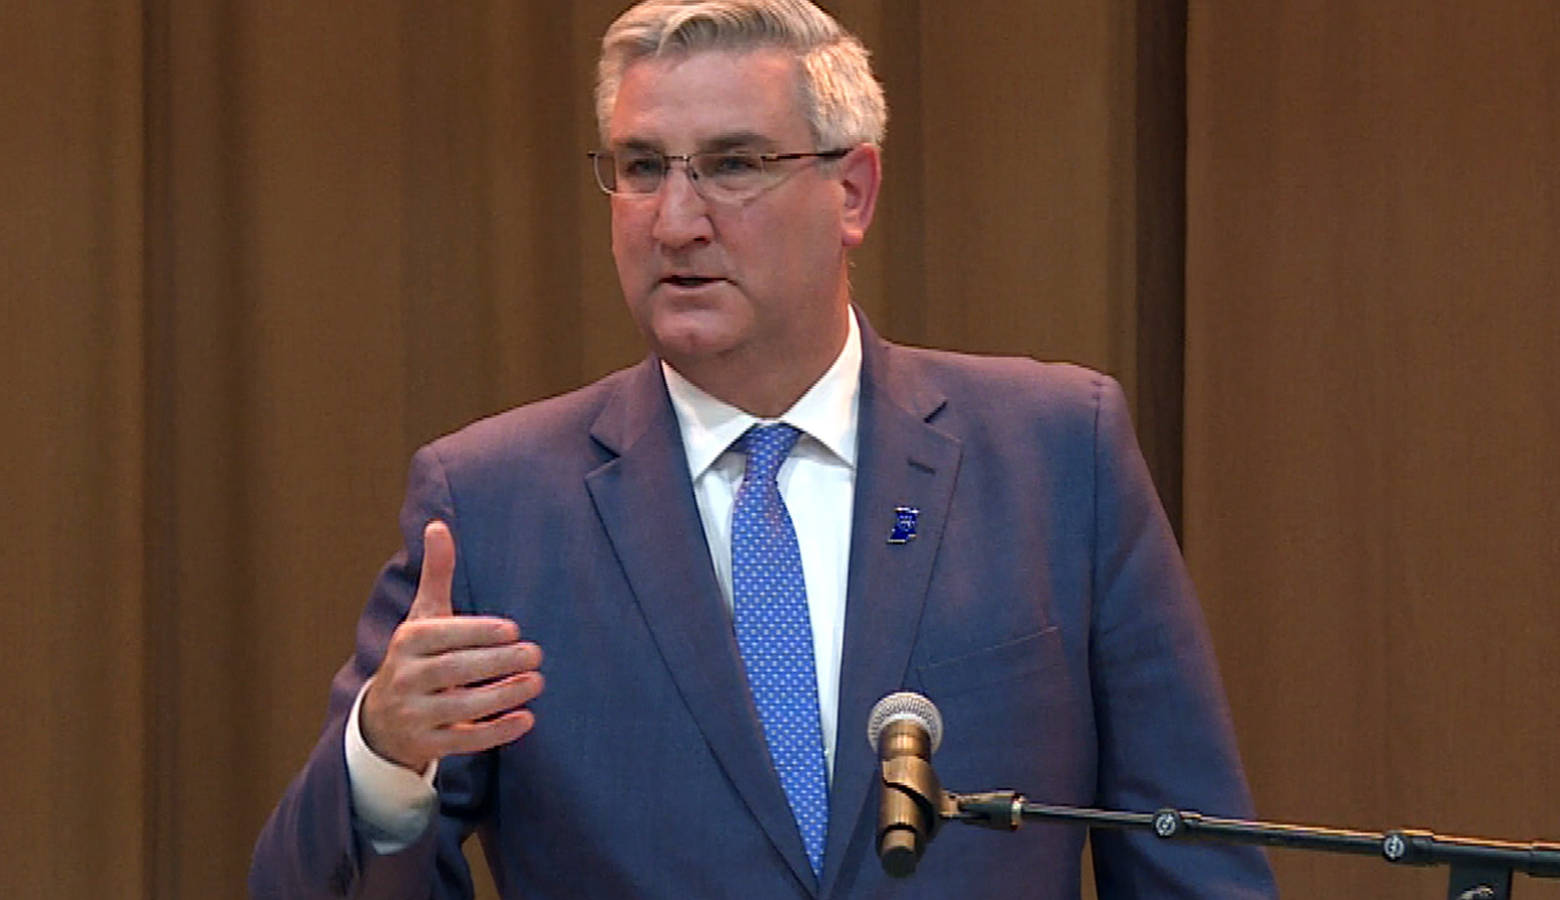 Gov. Eric Holcomb signed the hate crimes bill into law Wednesday. He called it "a strong stand against targeted violence." (Zach Herndon/WTIU)